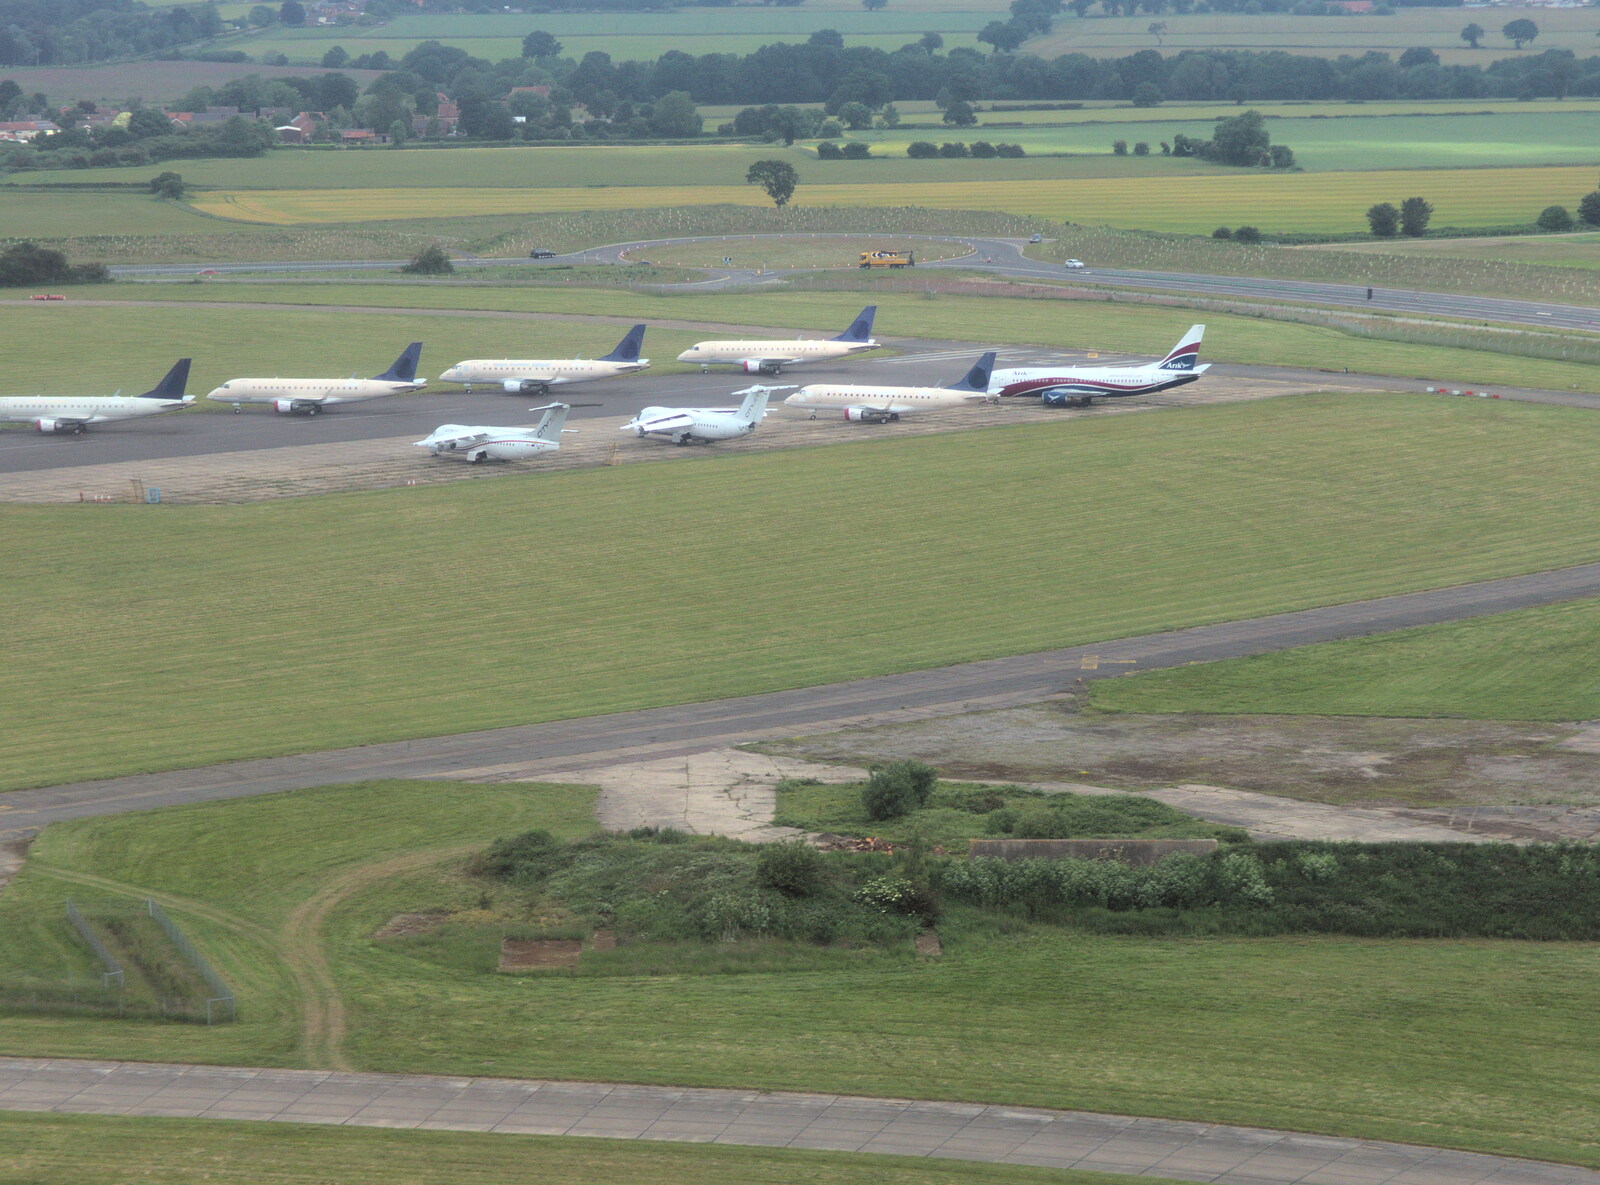 Norwich Airport has quite the collection of planes from A Postcard From Asperen, Gelderland, Netherlands - 9th June 2018